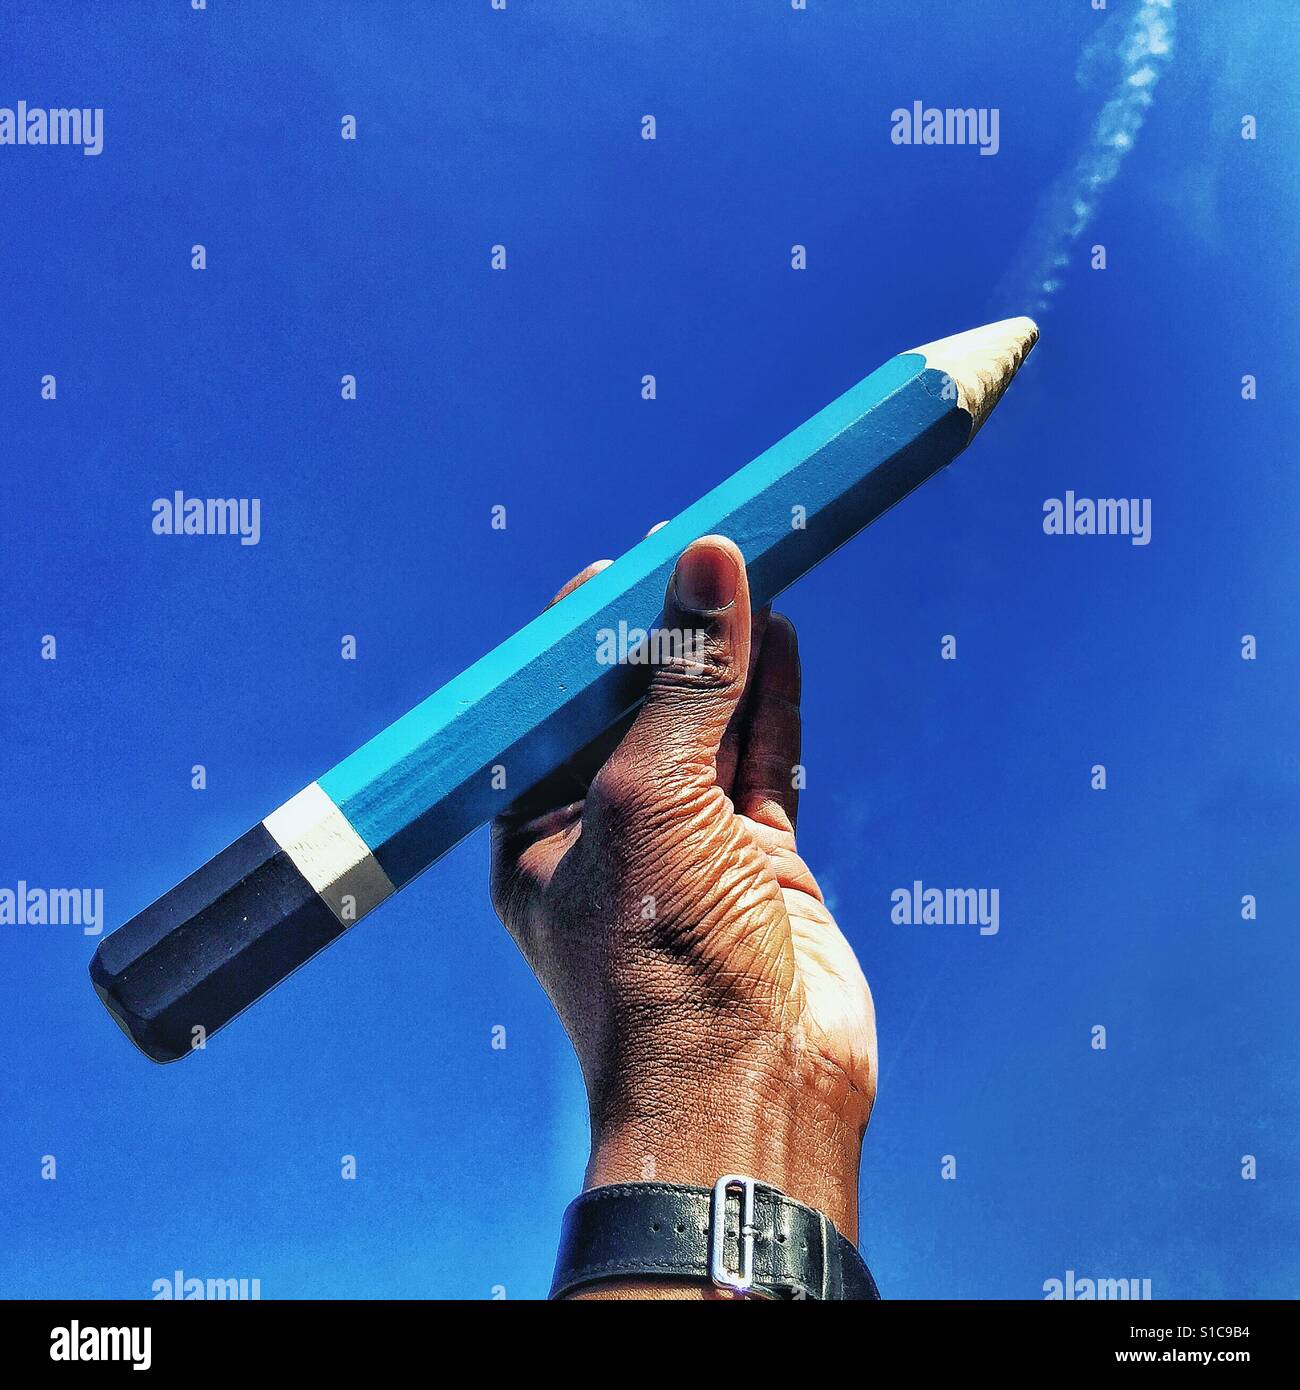 Hand holding a giant pencil against a blue sky. Stock Photo